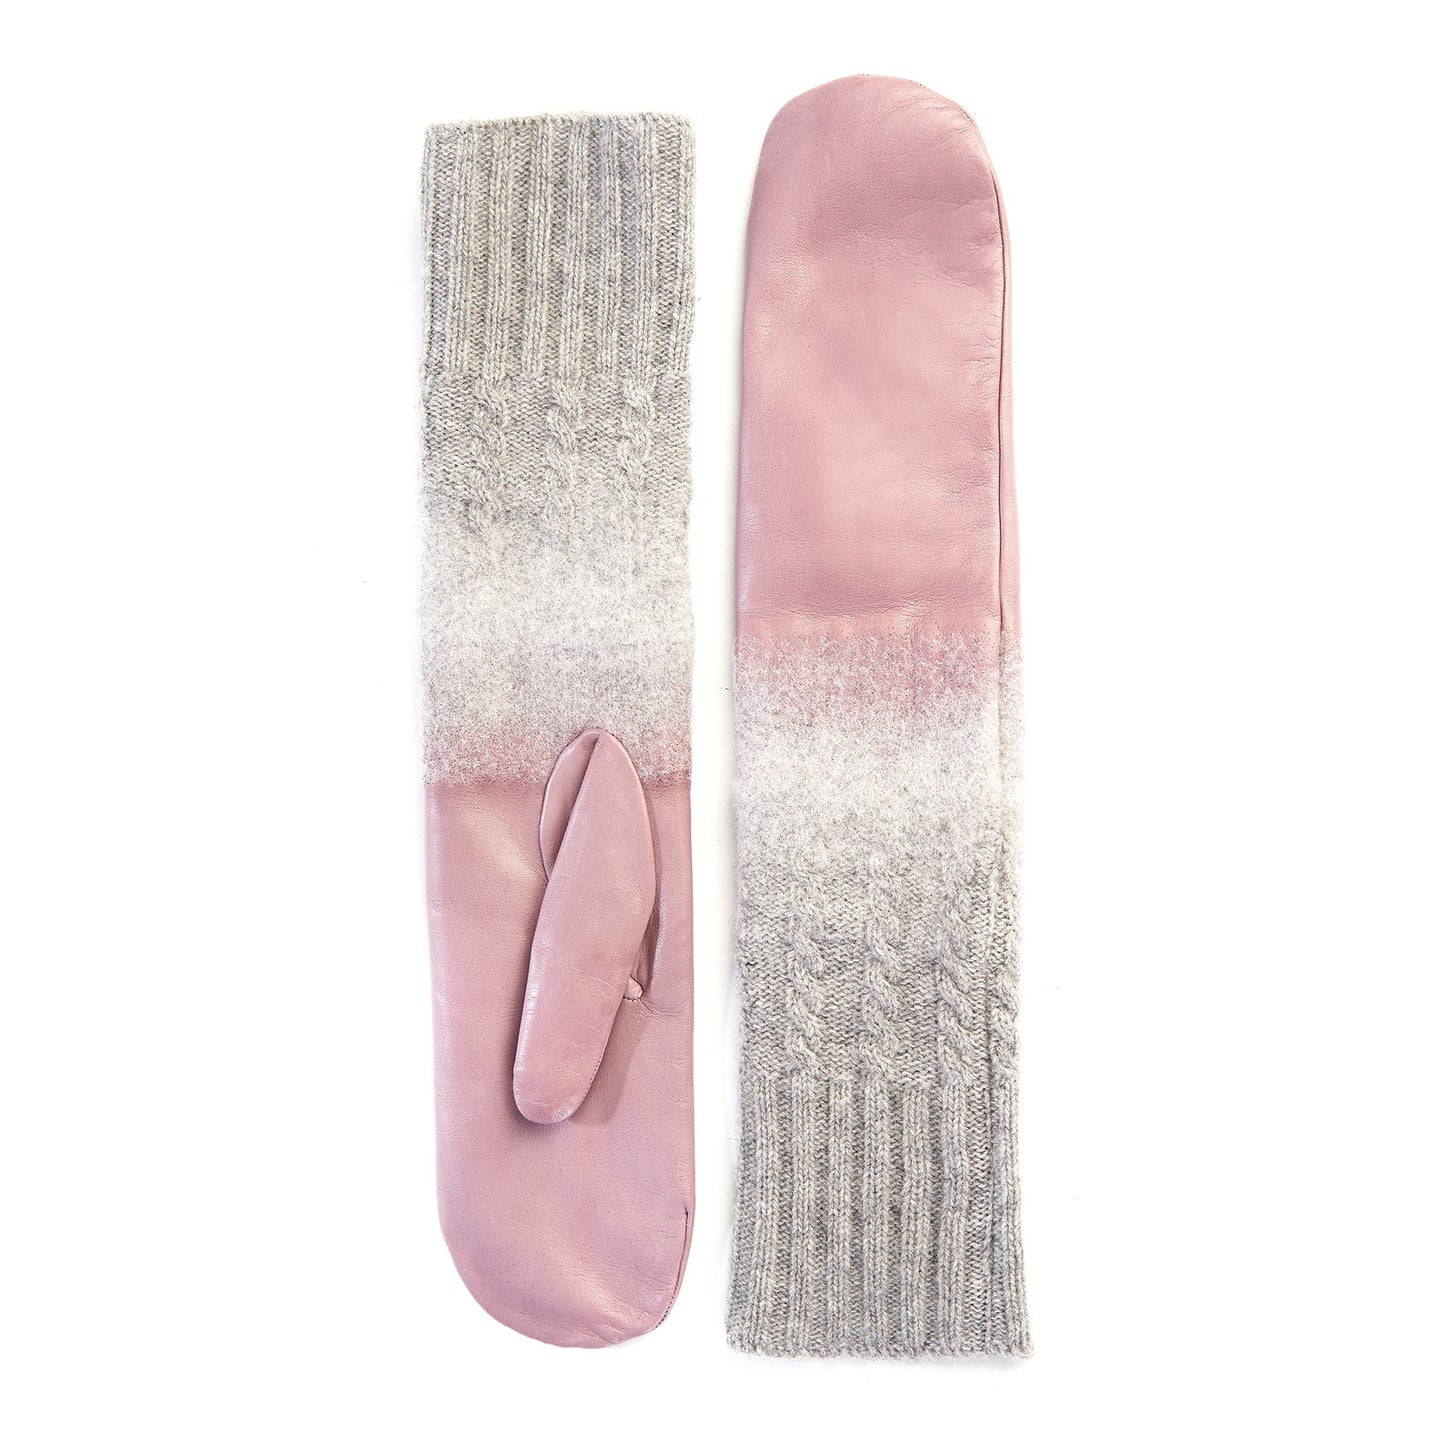 Women's mitten gloves in pink nappa leather with wool needle punch details